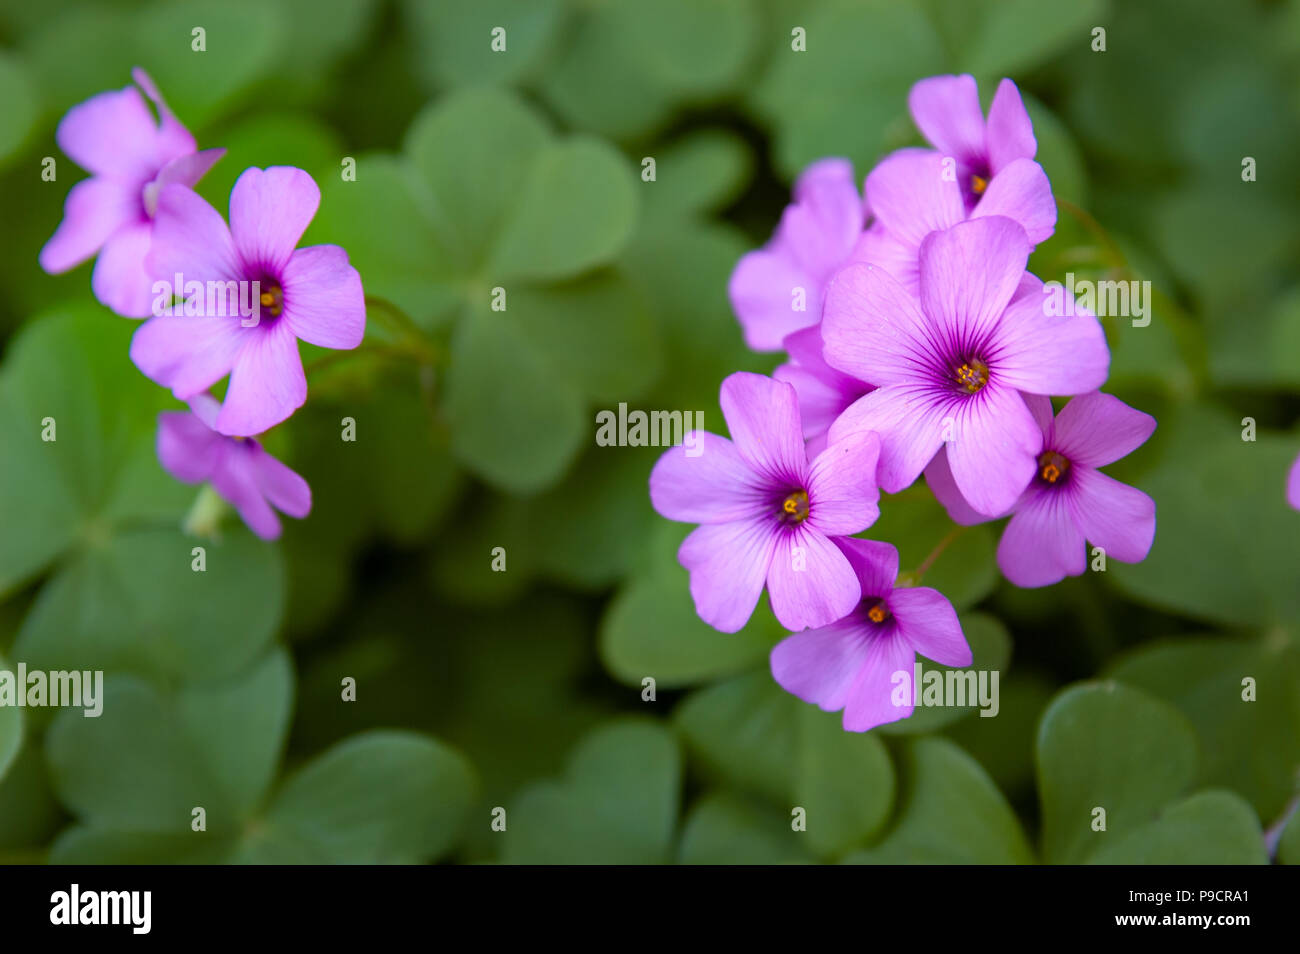 Pink Erodium ciconium flower, also known as Heron's bill, Storksbills or Filarees, on green leaves background Stock Photo